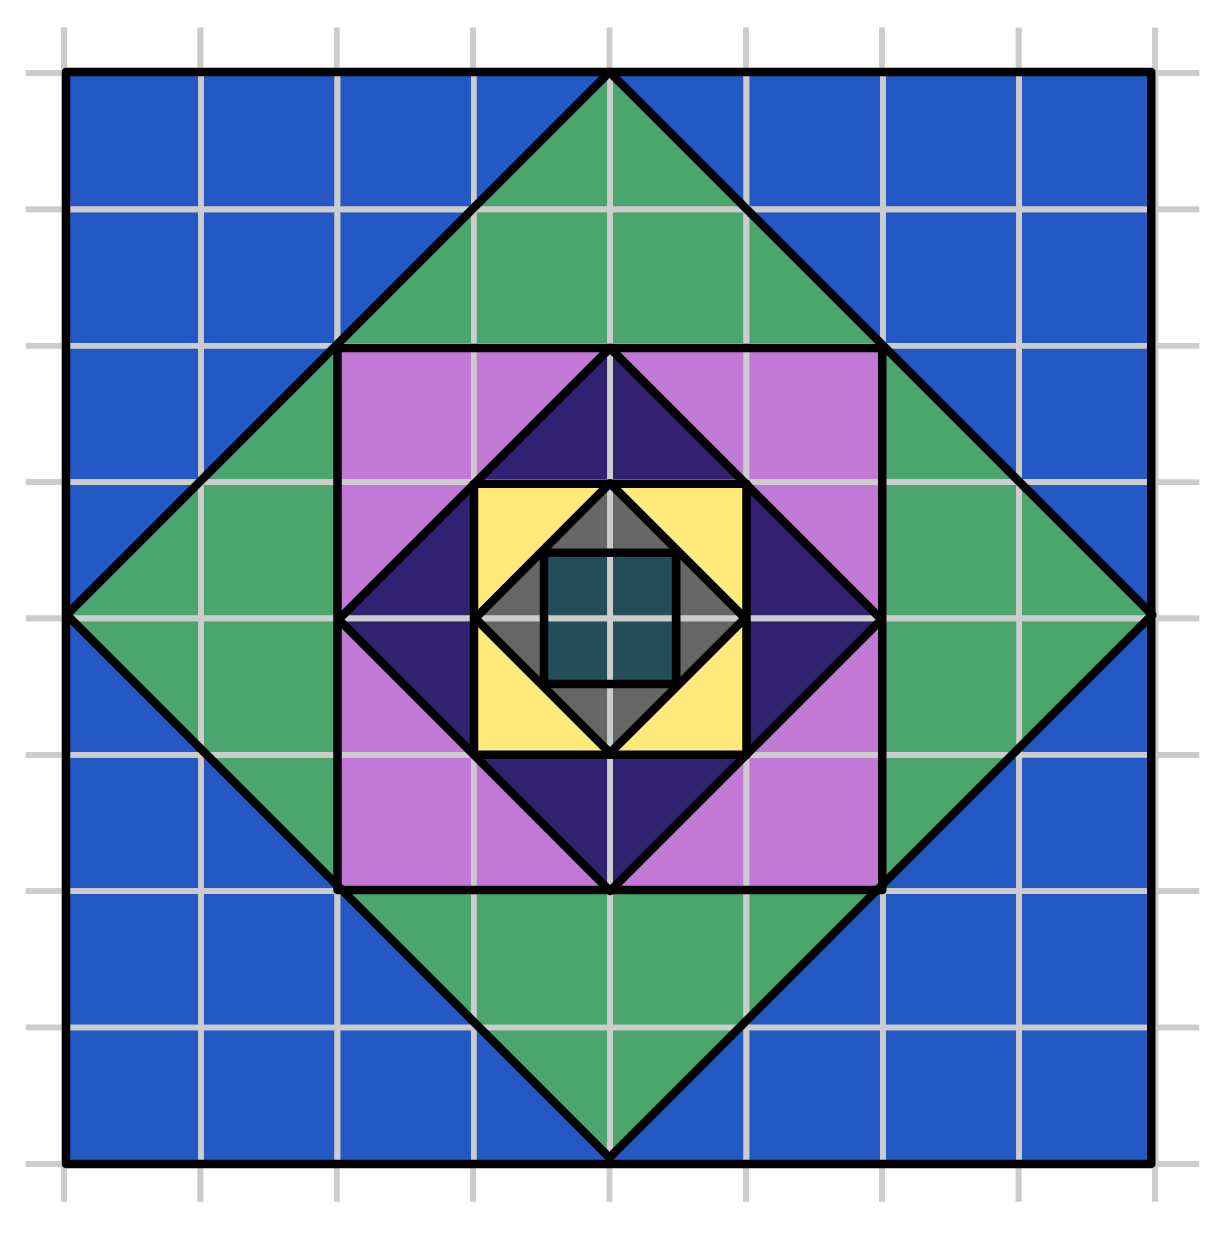 An eight by eight unit square is divided into different coloured fractional parts in a variety of sizes: Four blue triangles that are 8 square units each, four light-green triangles that are 4 square units each, four pink triangles that are 2 square units each, four purple triangles that are 1 square unit each, four yellow triangles that are half a square unit each, four grey triangles that are one quarter of a square unit each, and one dark green square that is exactly one square unit in size.